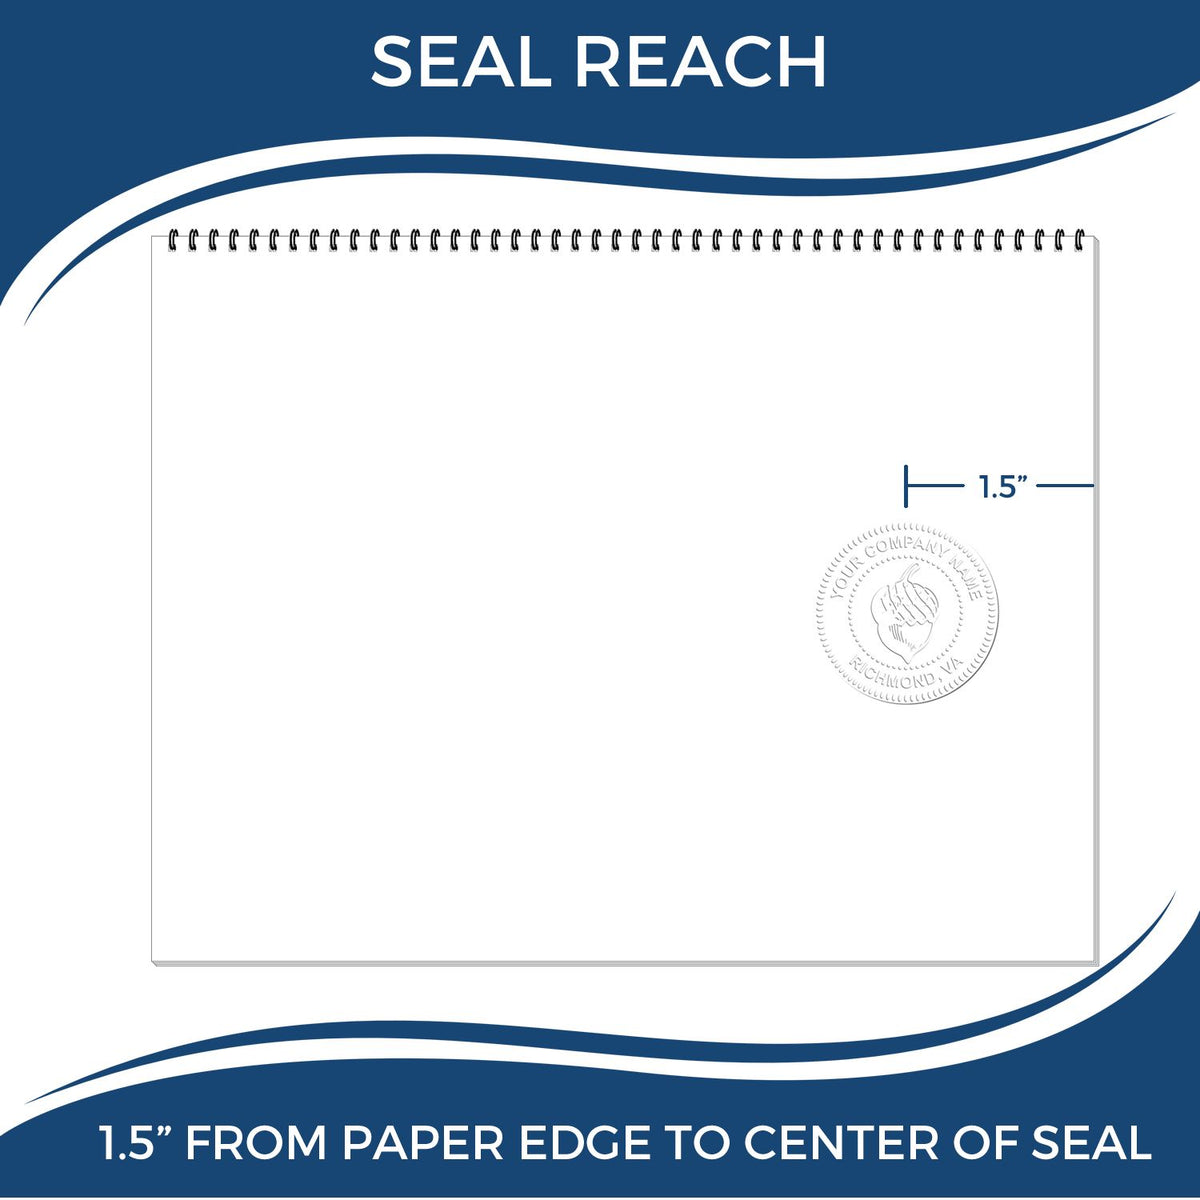 An infographic showing the seal reach which is represented by a ruler and a miniature seal image of the Handheld Connecticut Professional Geologist Embosser